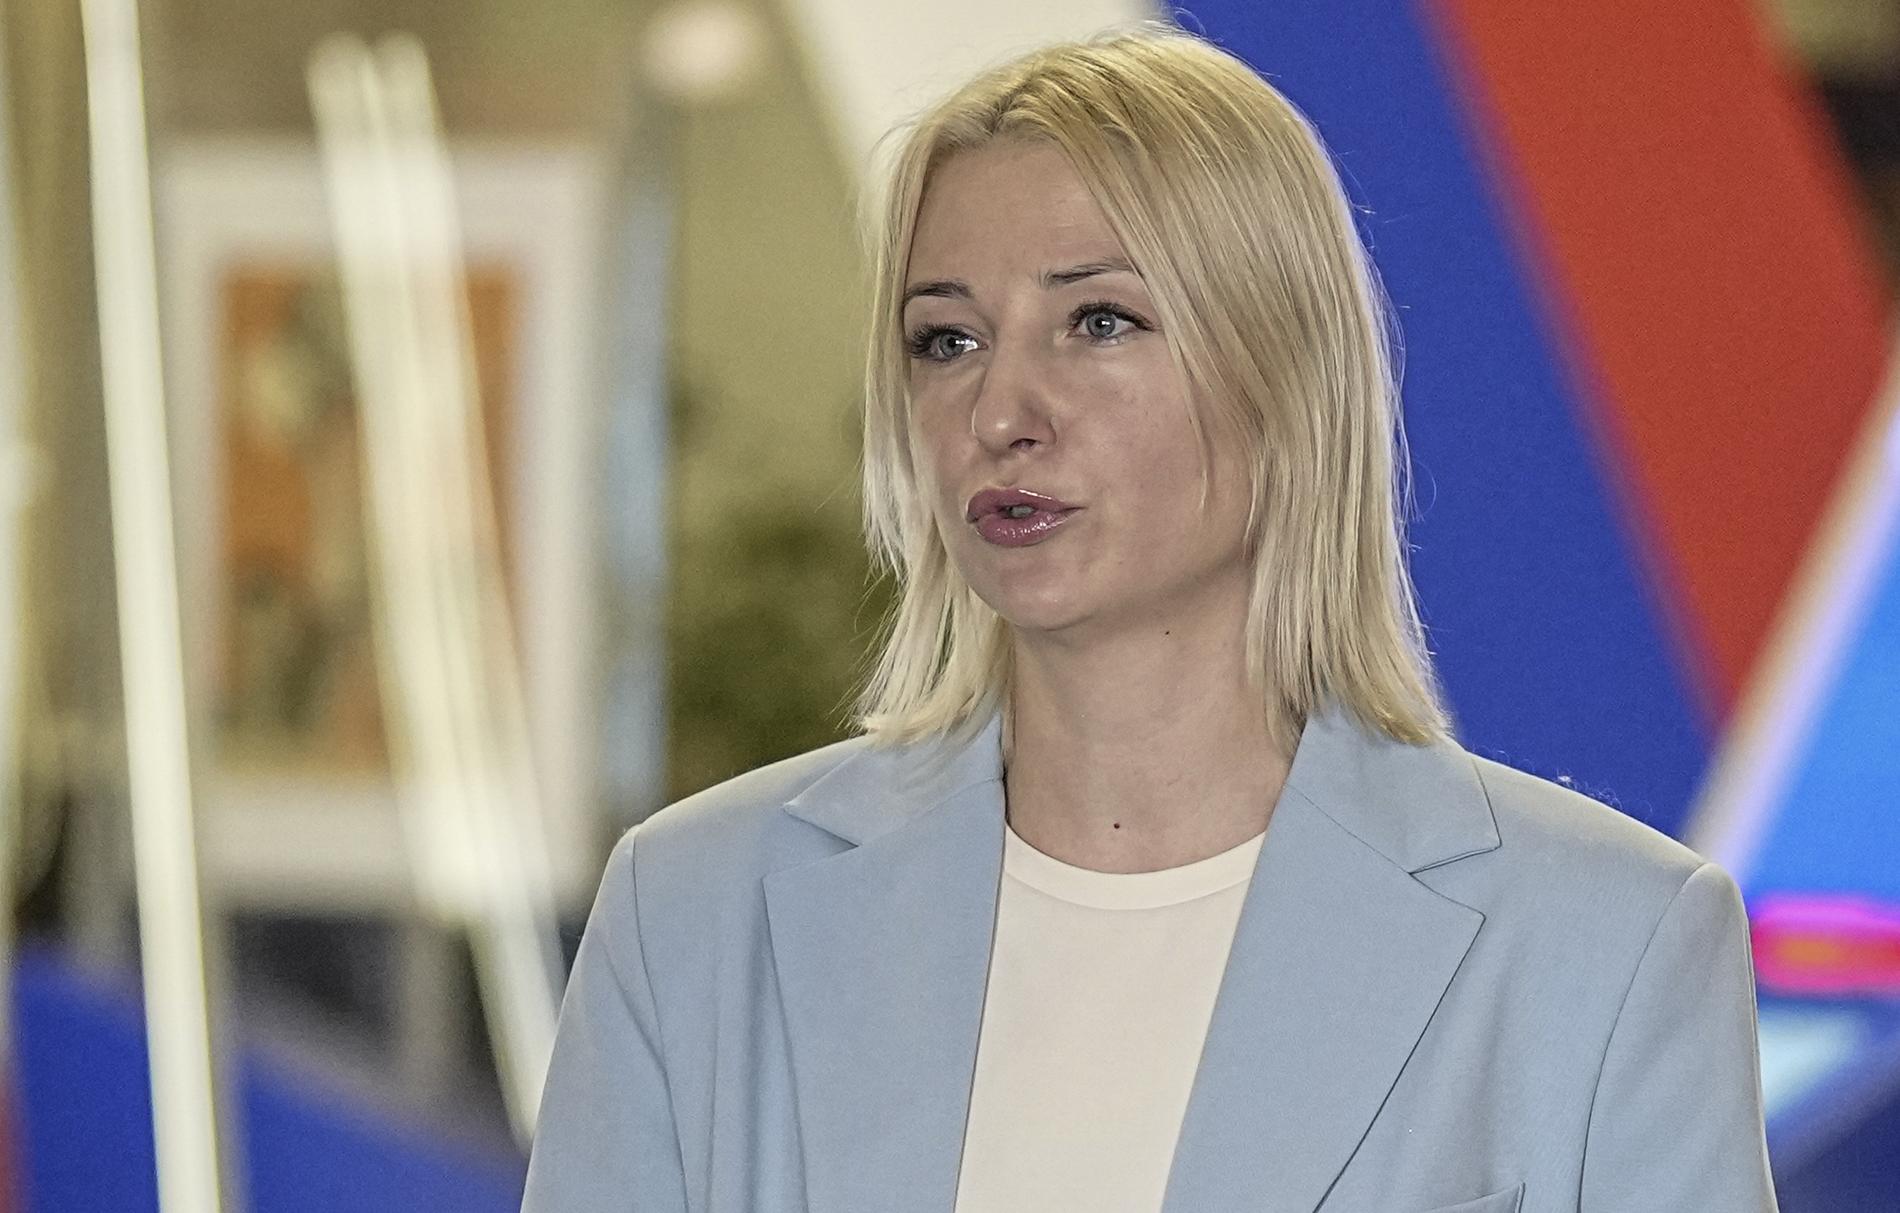 Mother of three (40) wants to challenge Putin for president